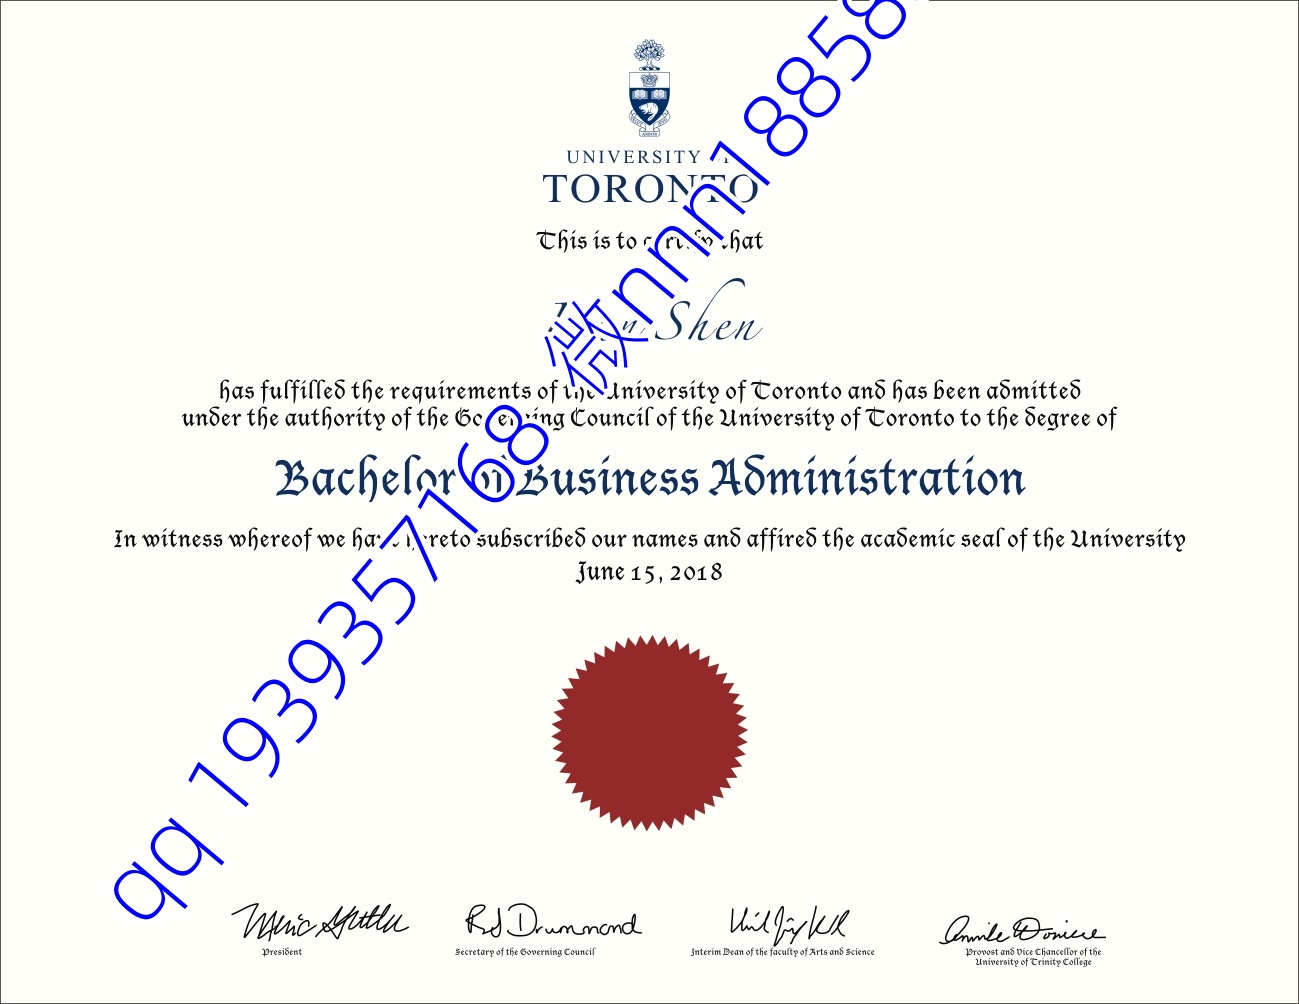 Diploma from the University of Toronto, Canada